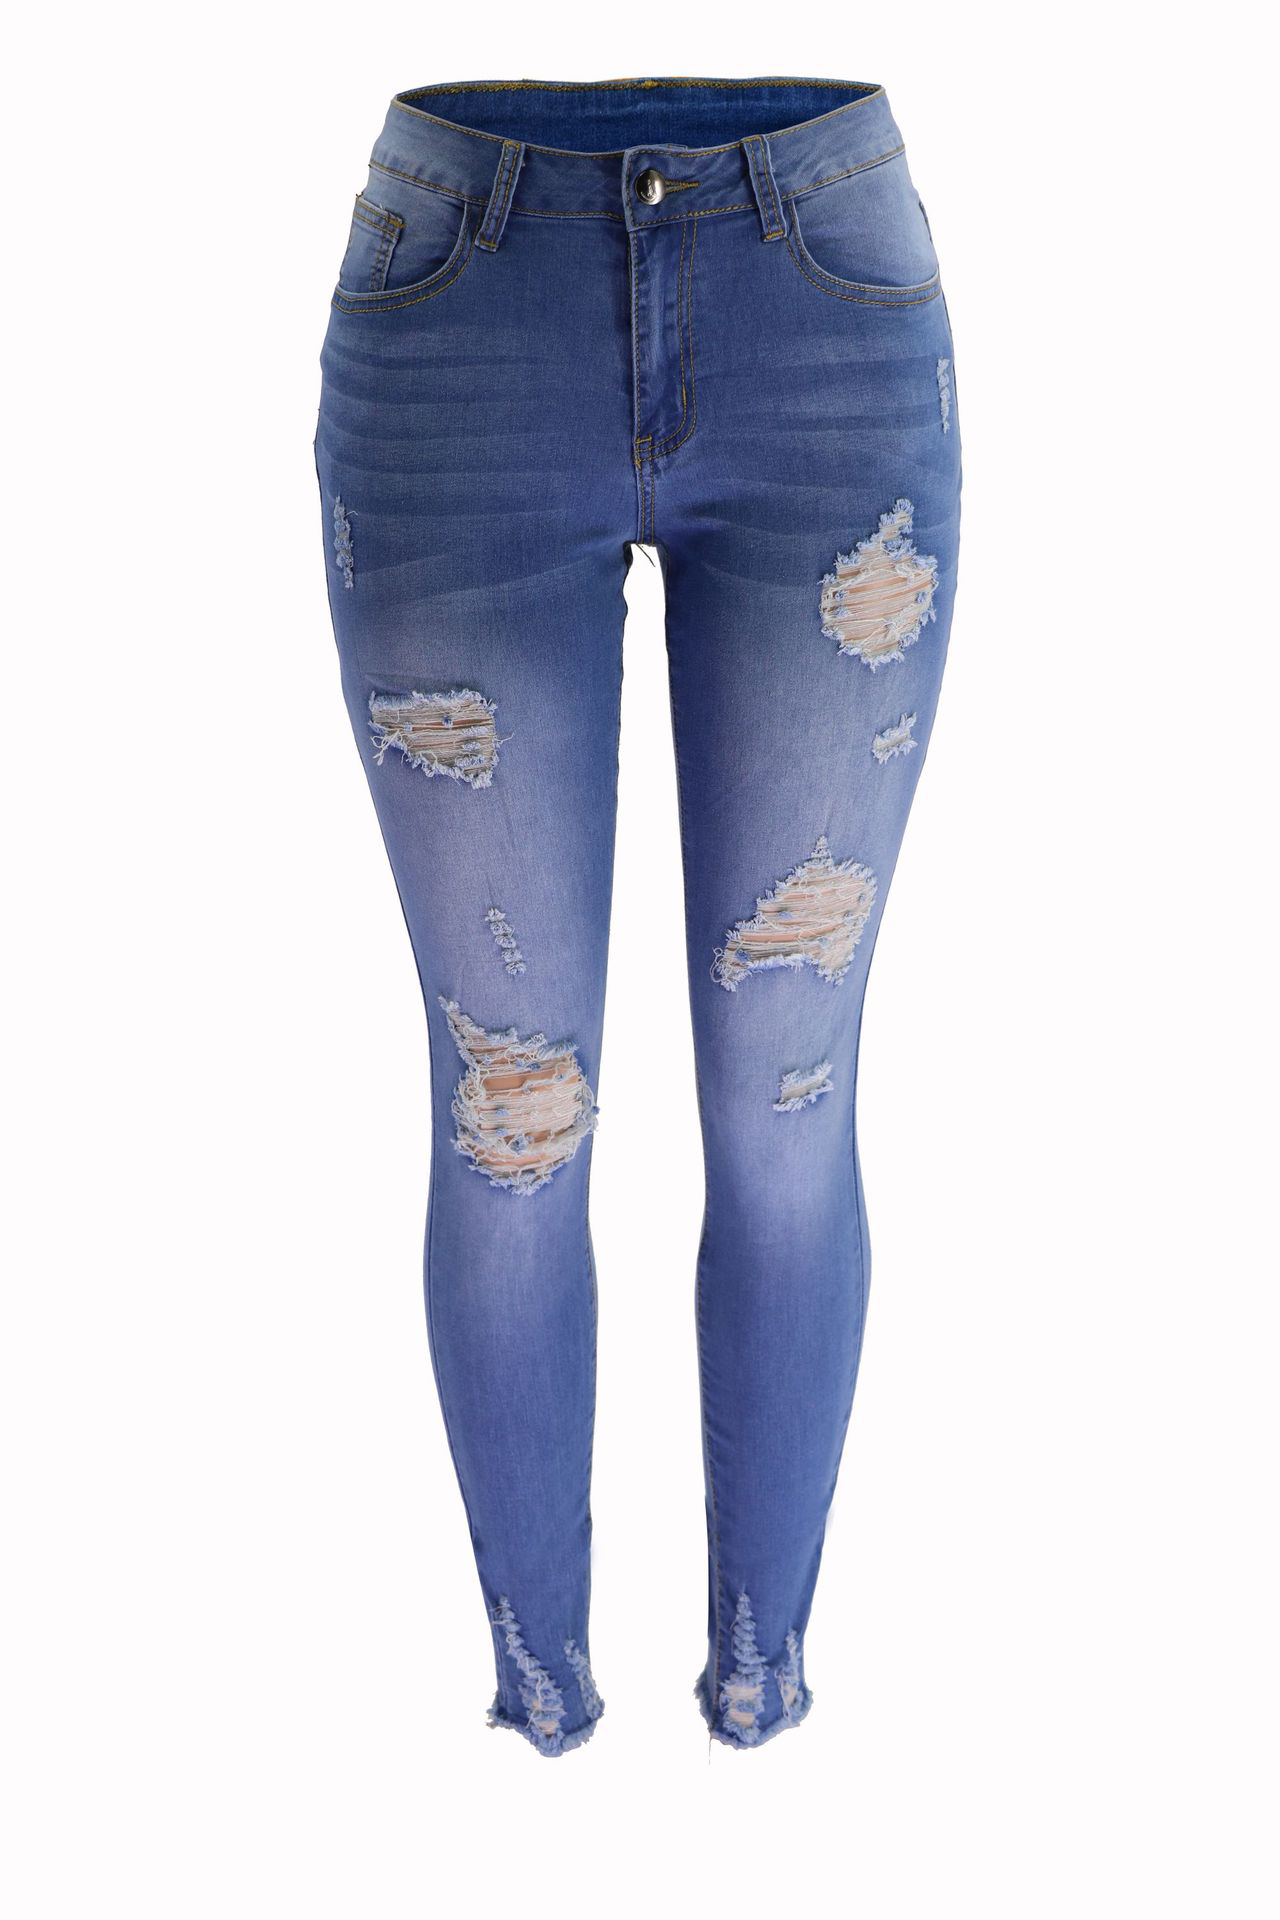 Women's High-Rise Distressed Skinny Jeans